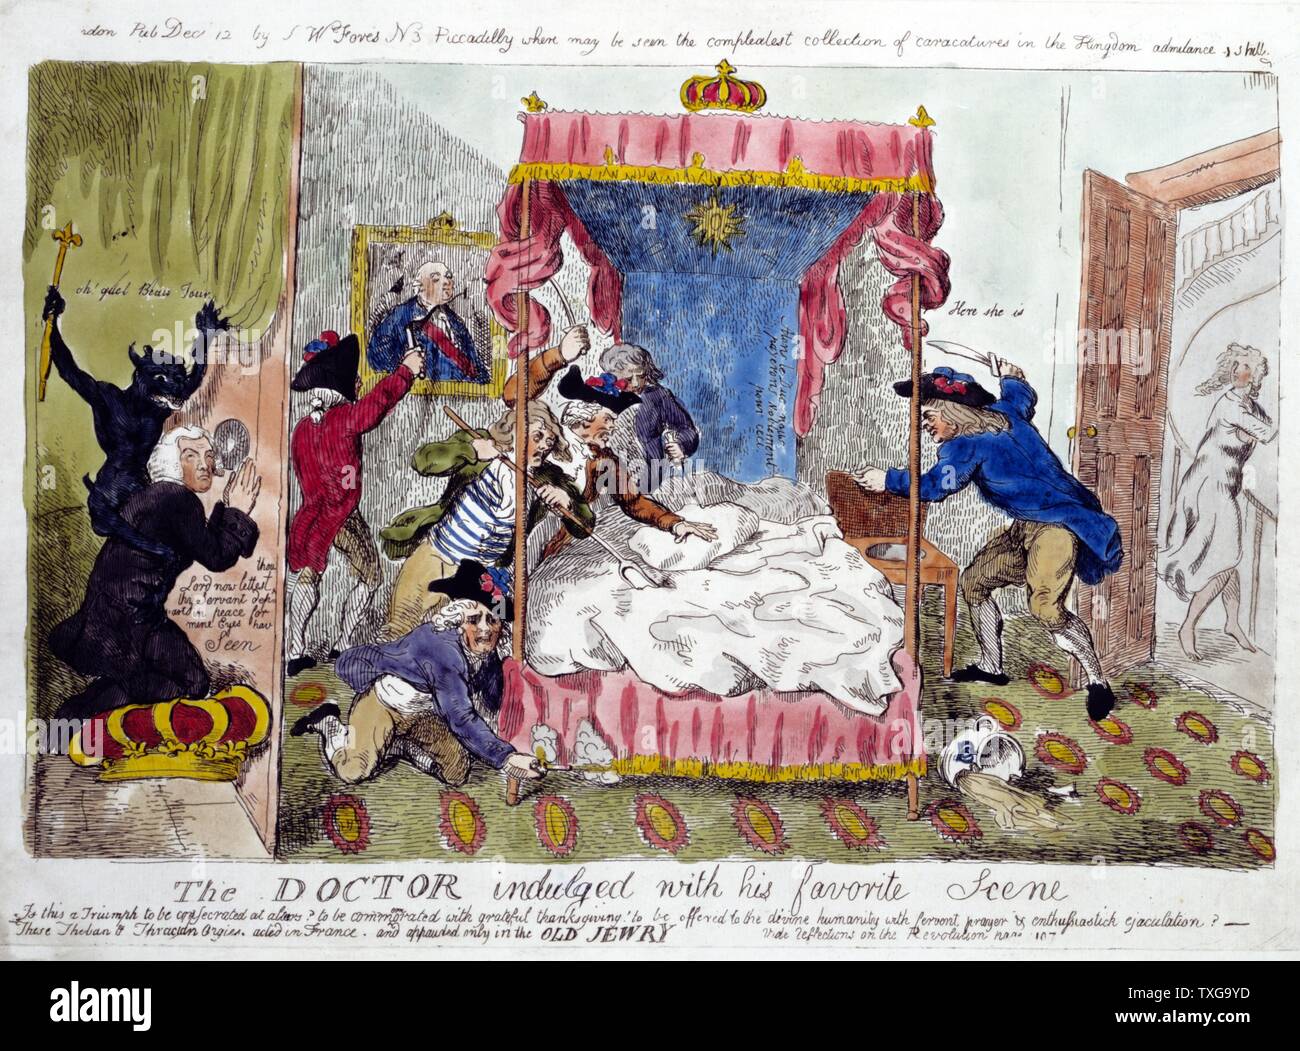 Isaac Cruikshank Scottish school The Doctor indulged with his favorite scene - Showing Richard Price, a Welsh philosopher, supporter of principles of French Revolution watching crowd destroy Marie Antoinette's bed in search of her. Engraving Stock Photo